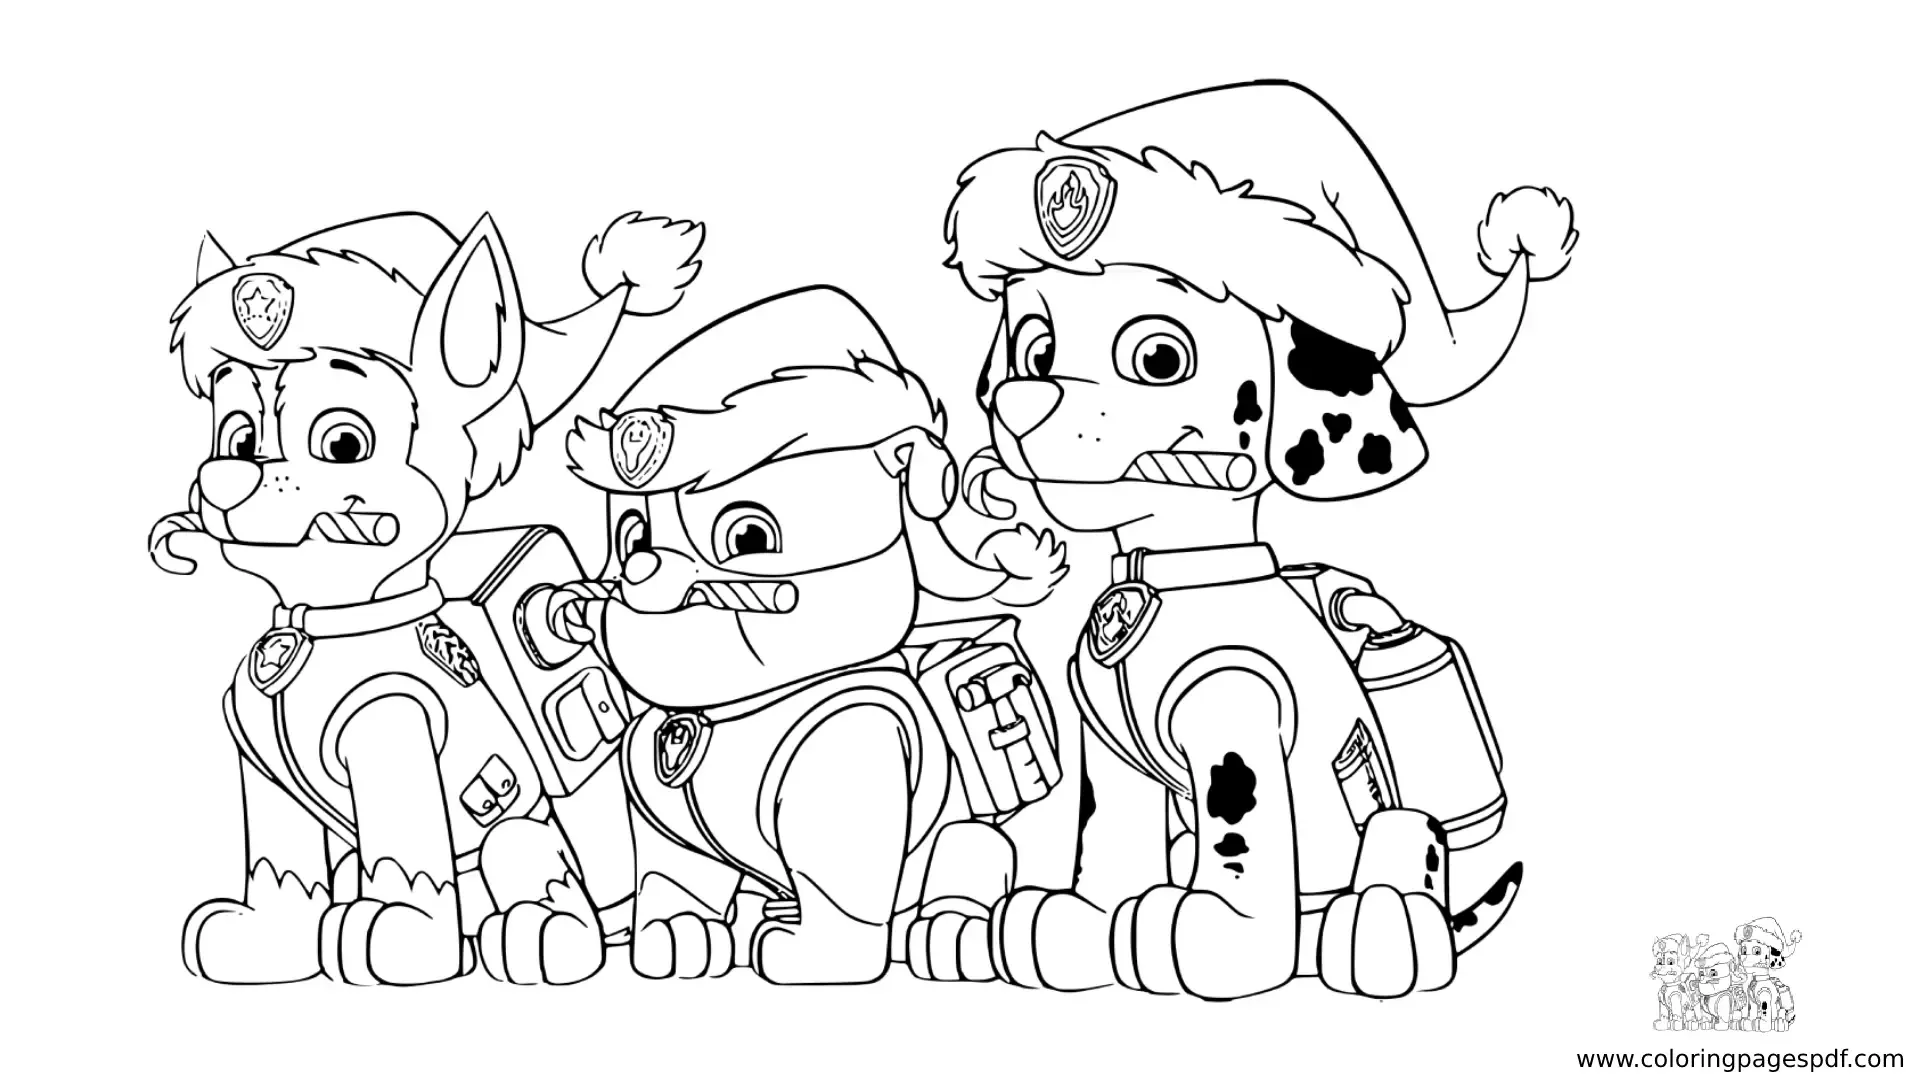 Coloring Pages Of Paw Patrol Dogs Celebrating Christmas